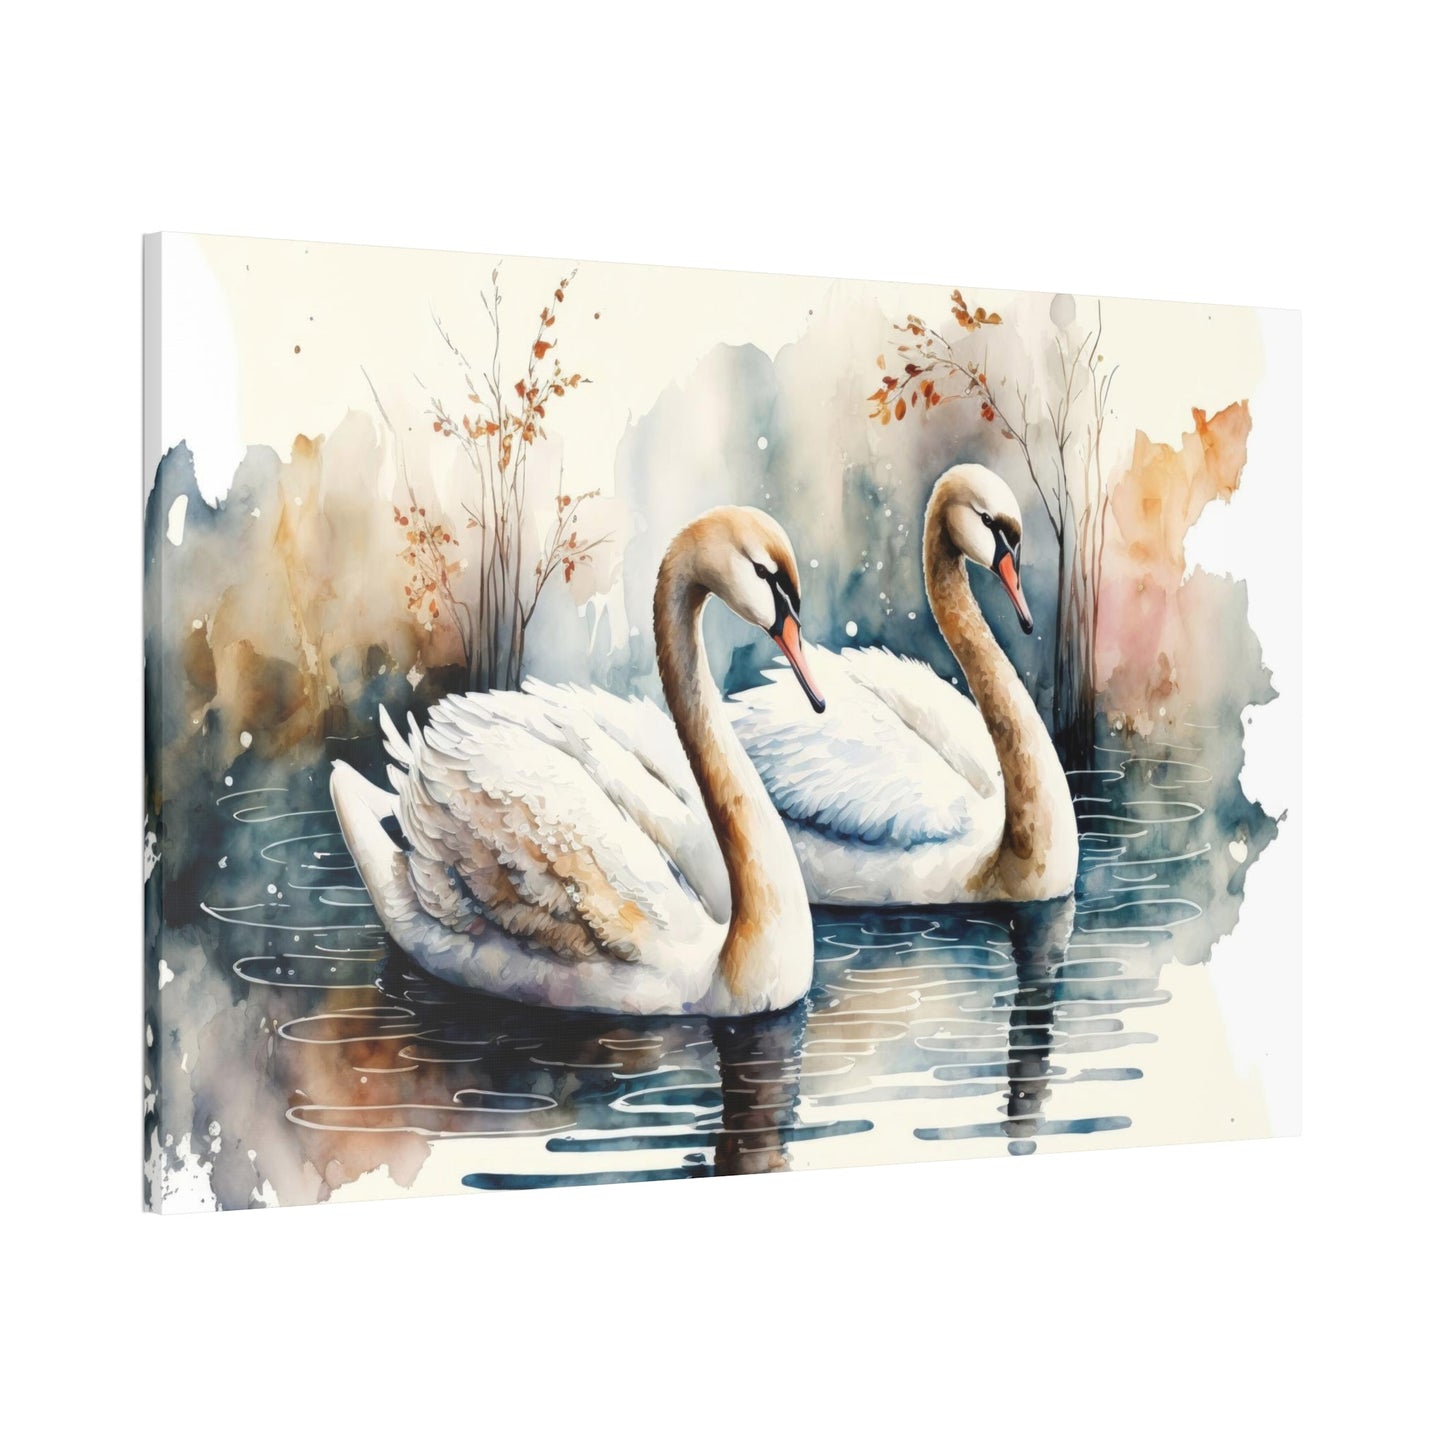 Gentle Giants: Framed Poster and Print on Canvas Featuring Majestic Swans